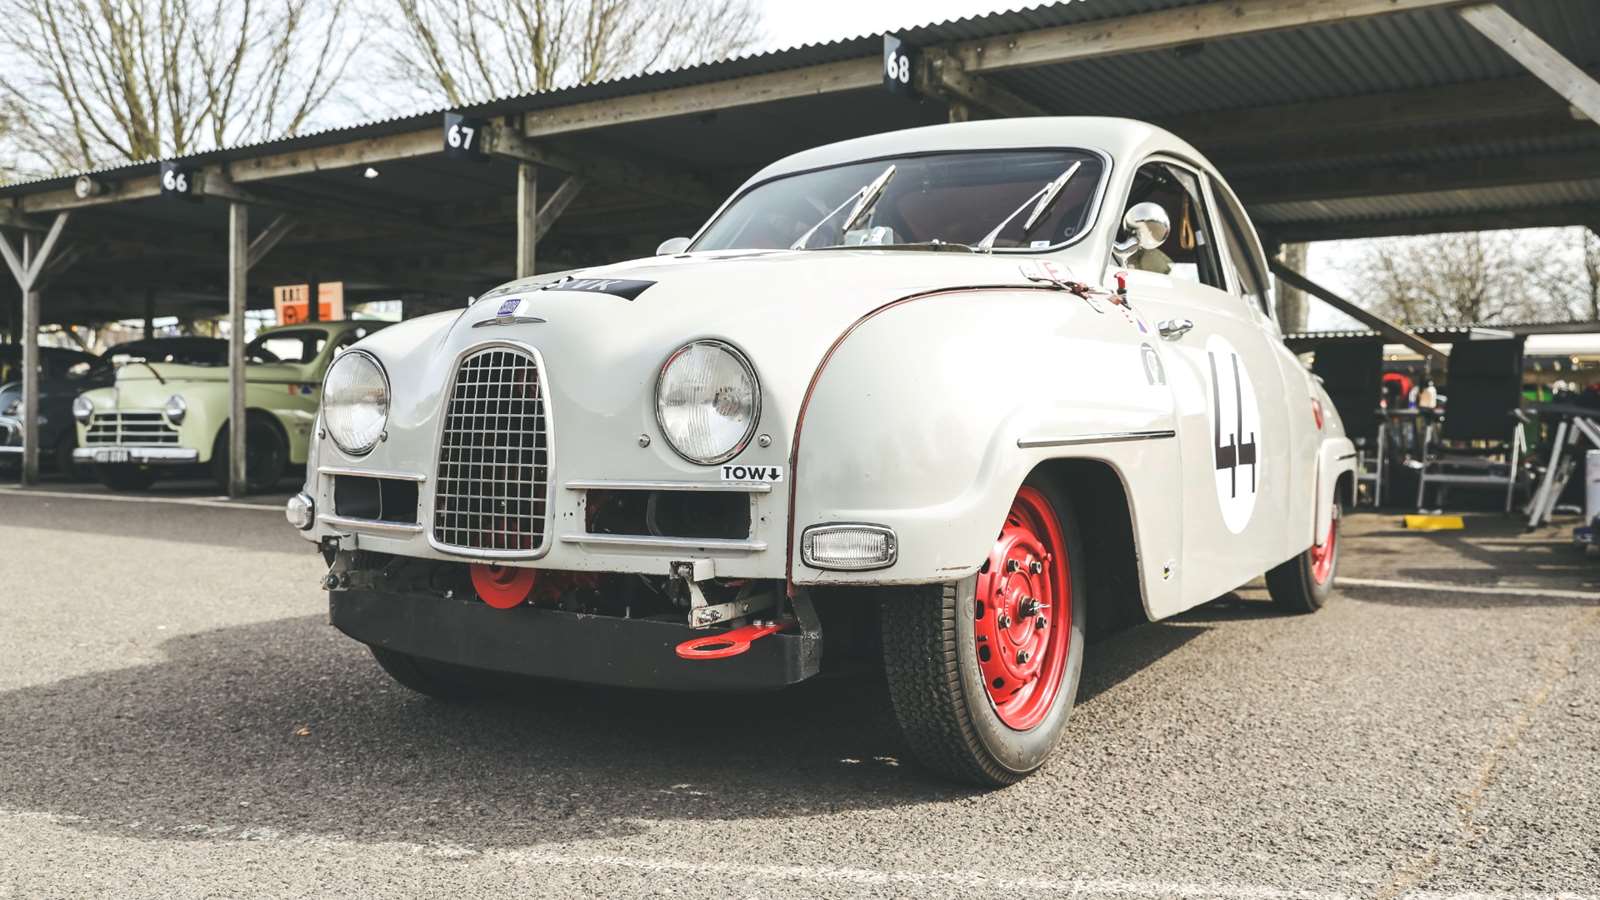 This screaming Saab 93 was the loudest car at Goodwood